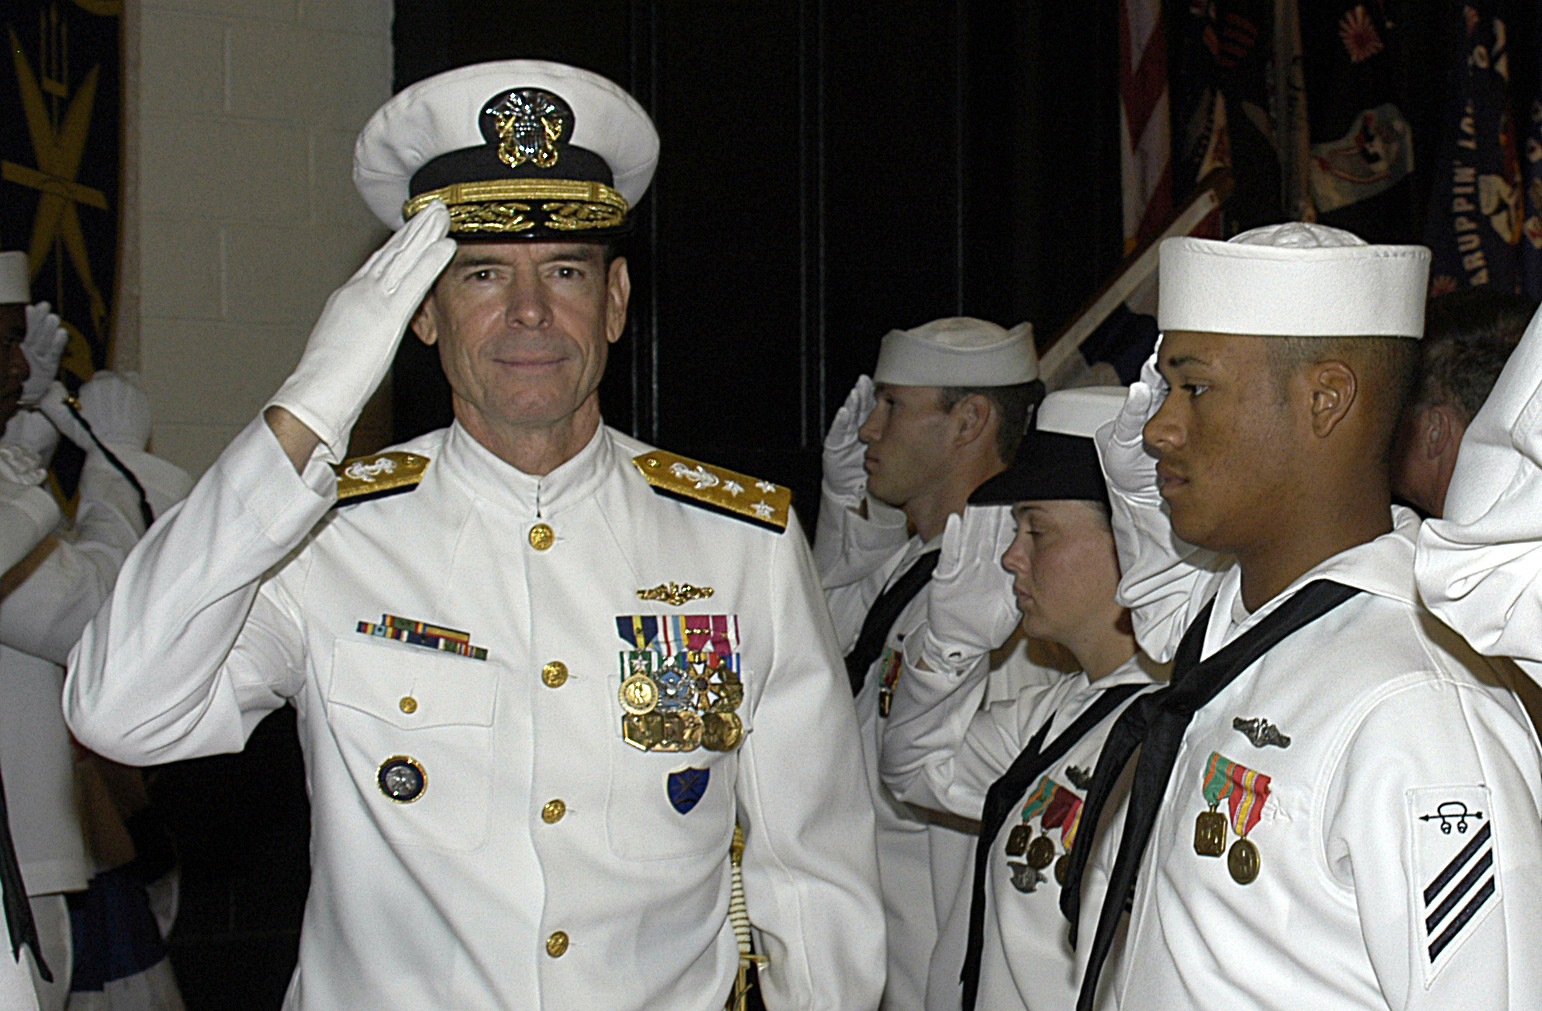 Uniforms of the United States Navy. 